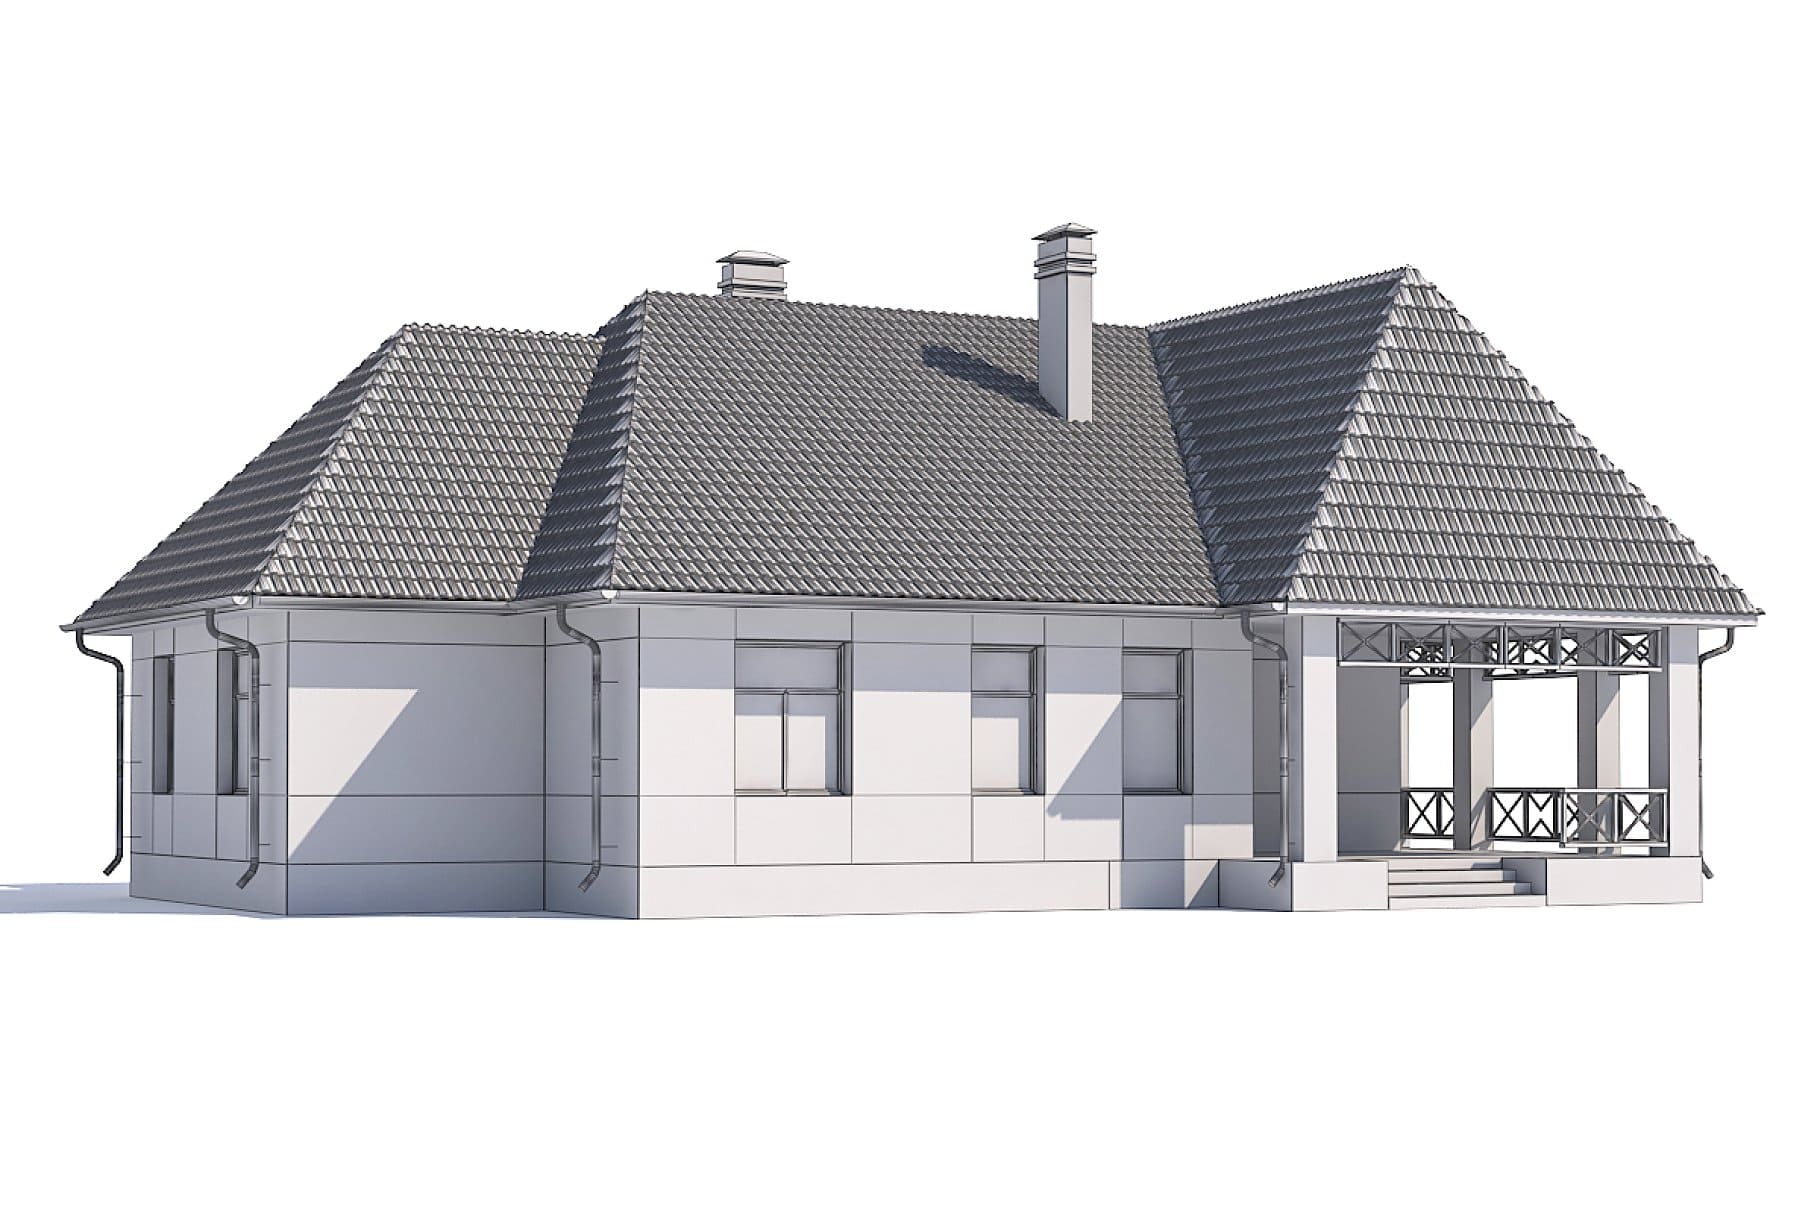 The facade of a 3D model of a one-story house.